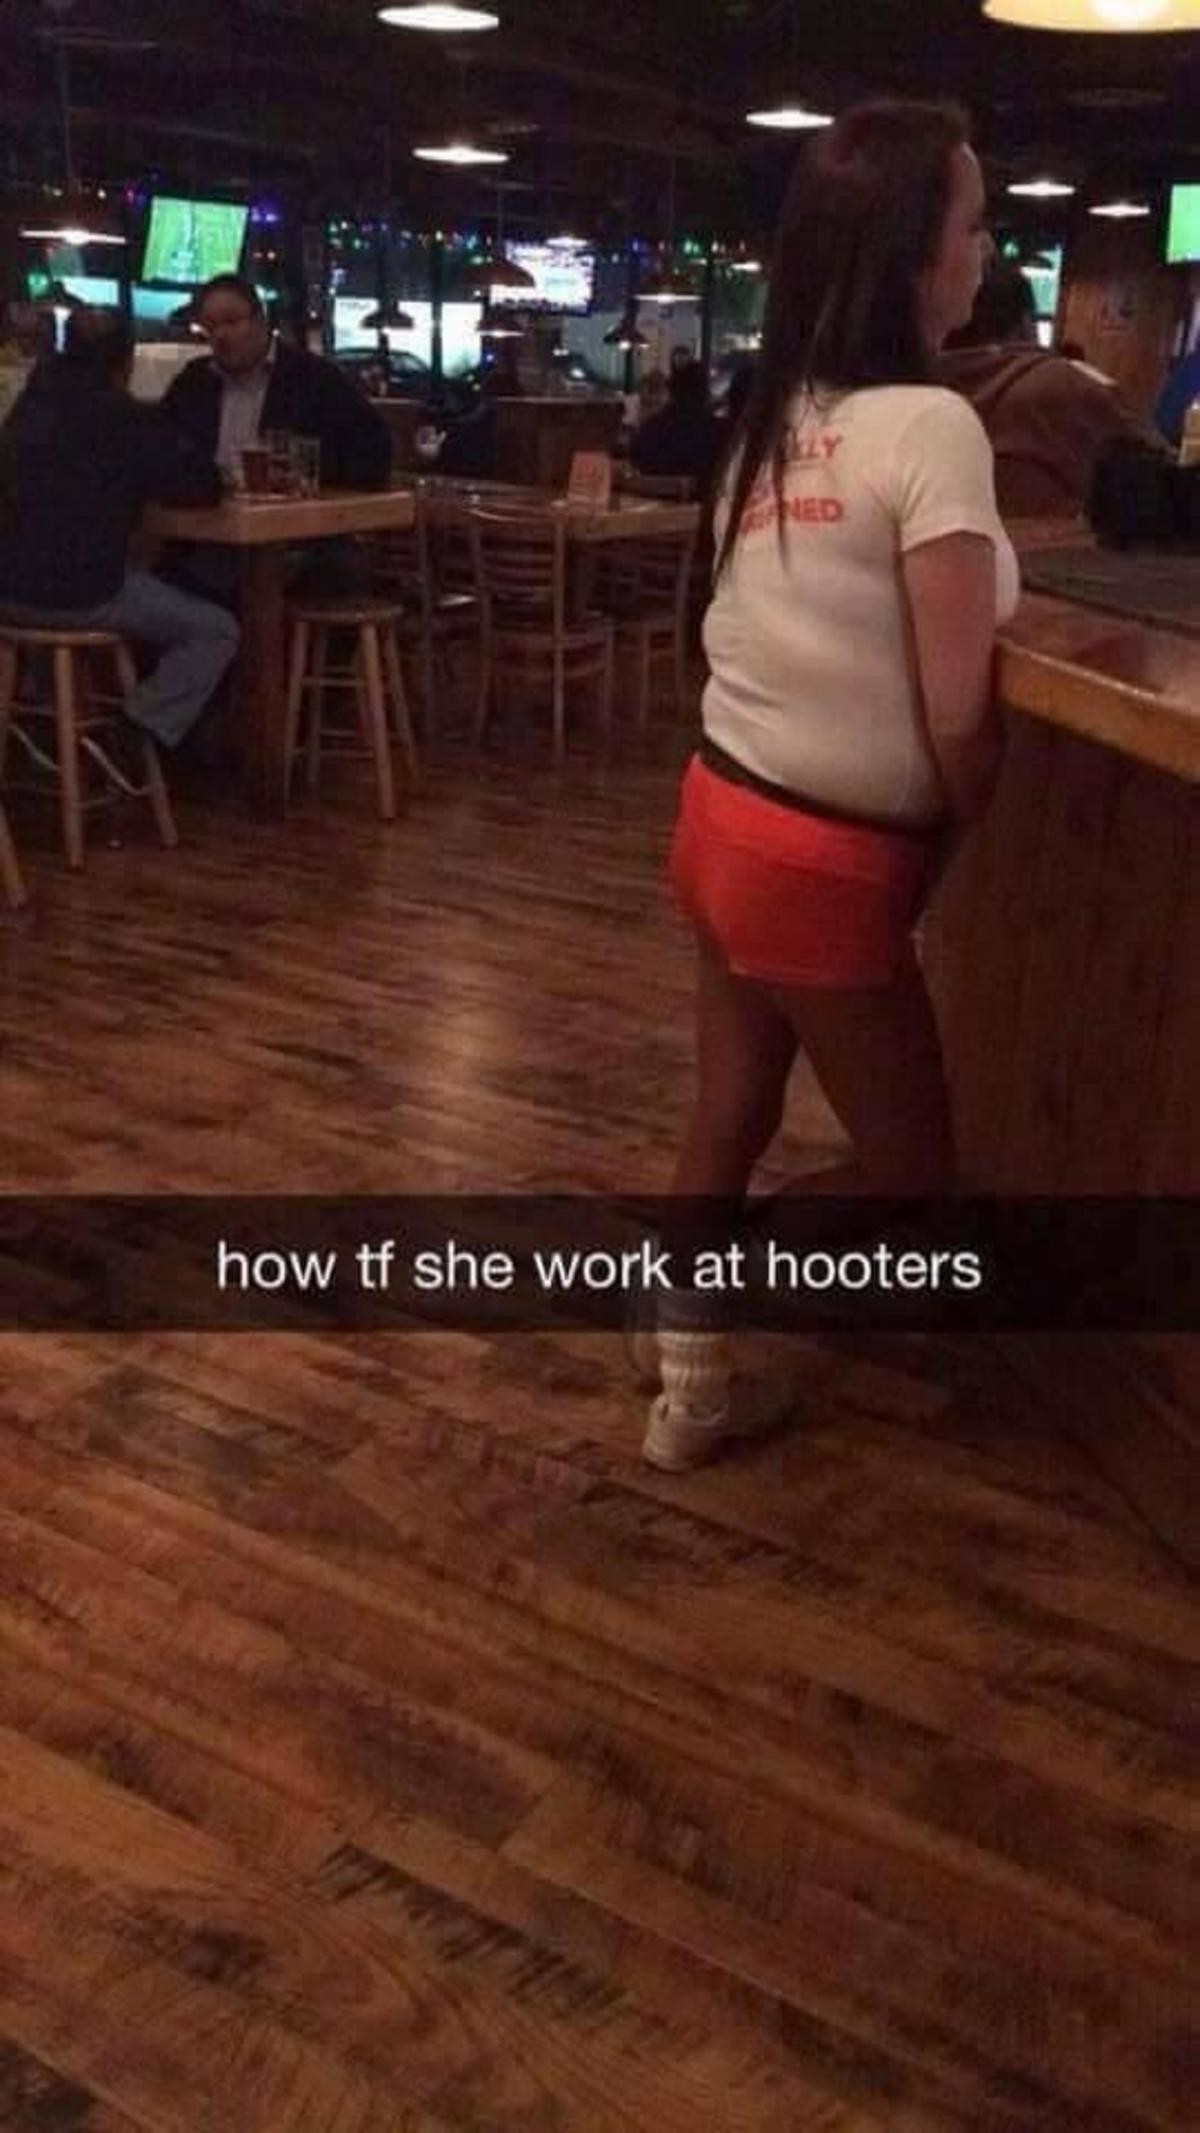 How tf tho?. join list: Degenerate (424 subs)Mention Clicks: 3022Msgs Sent: 13018Mention History Let's follow each other on Twitter! coyote_cares.. better question might be, does anyone actually go to a hooters anymore?